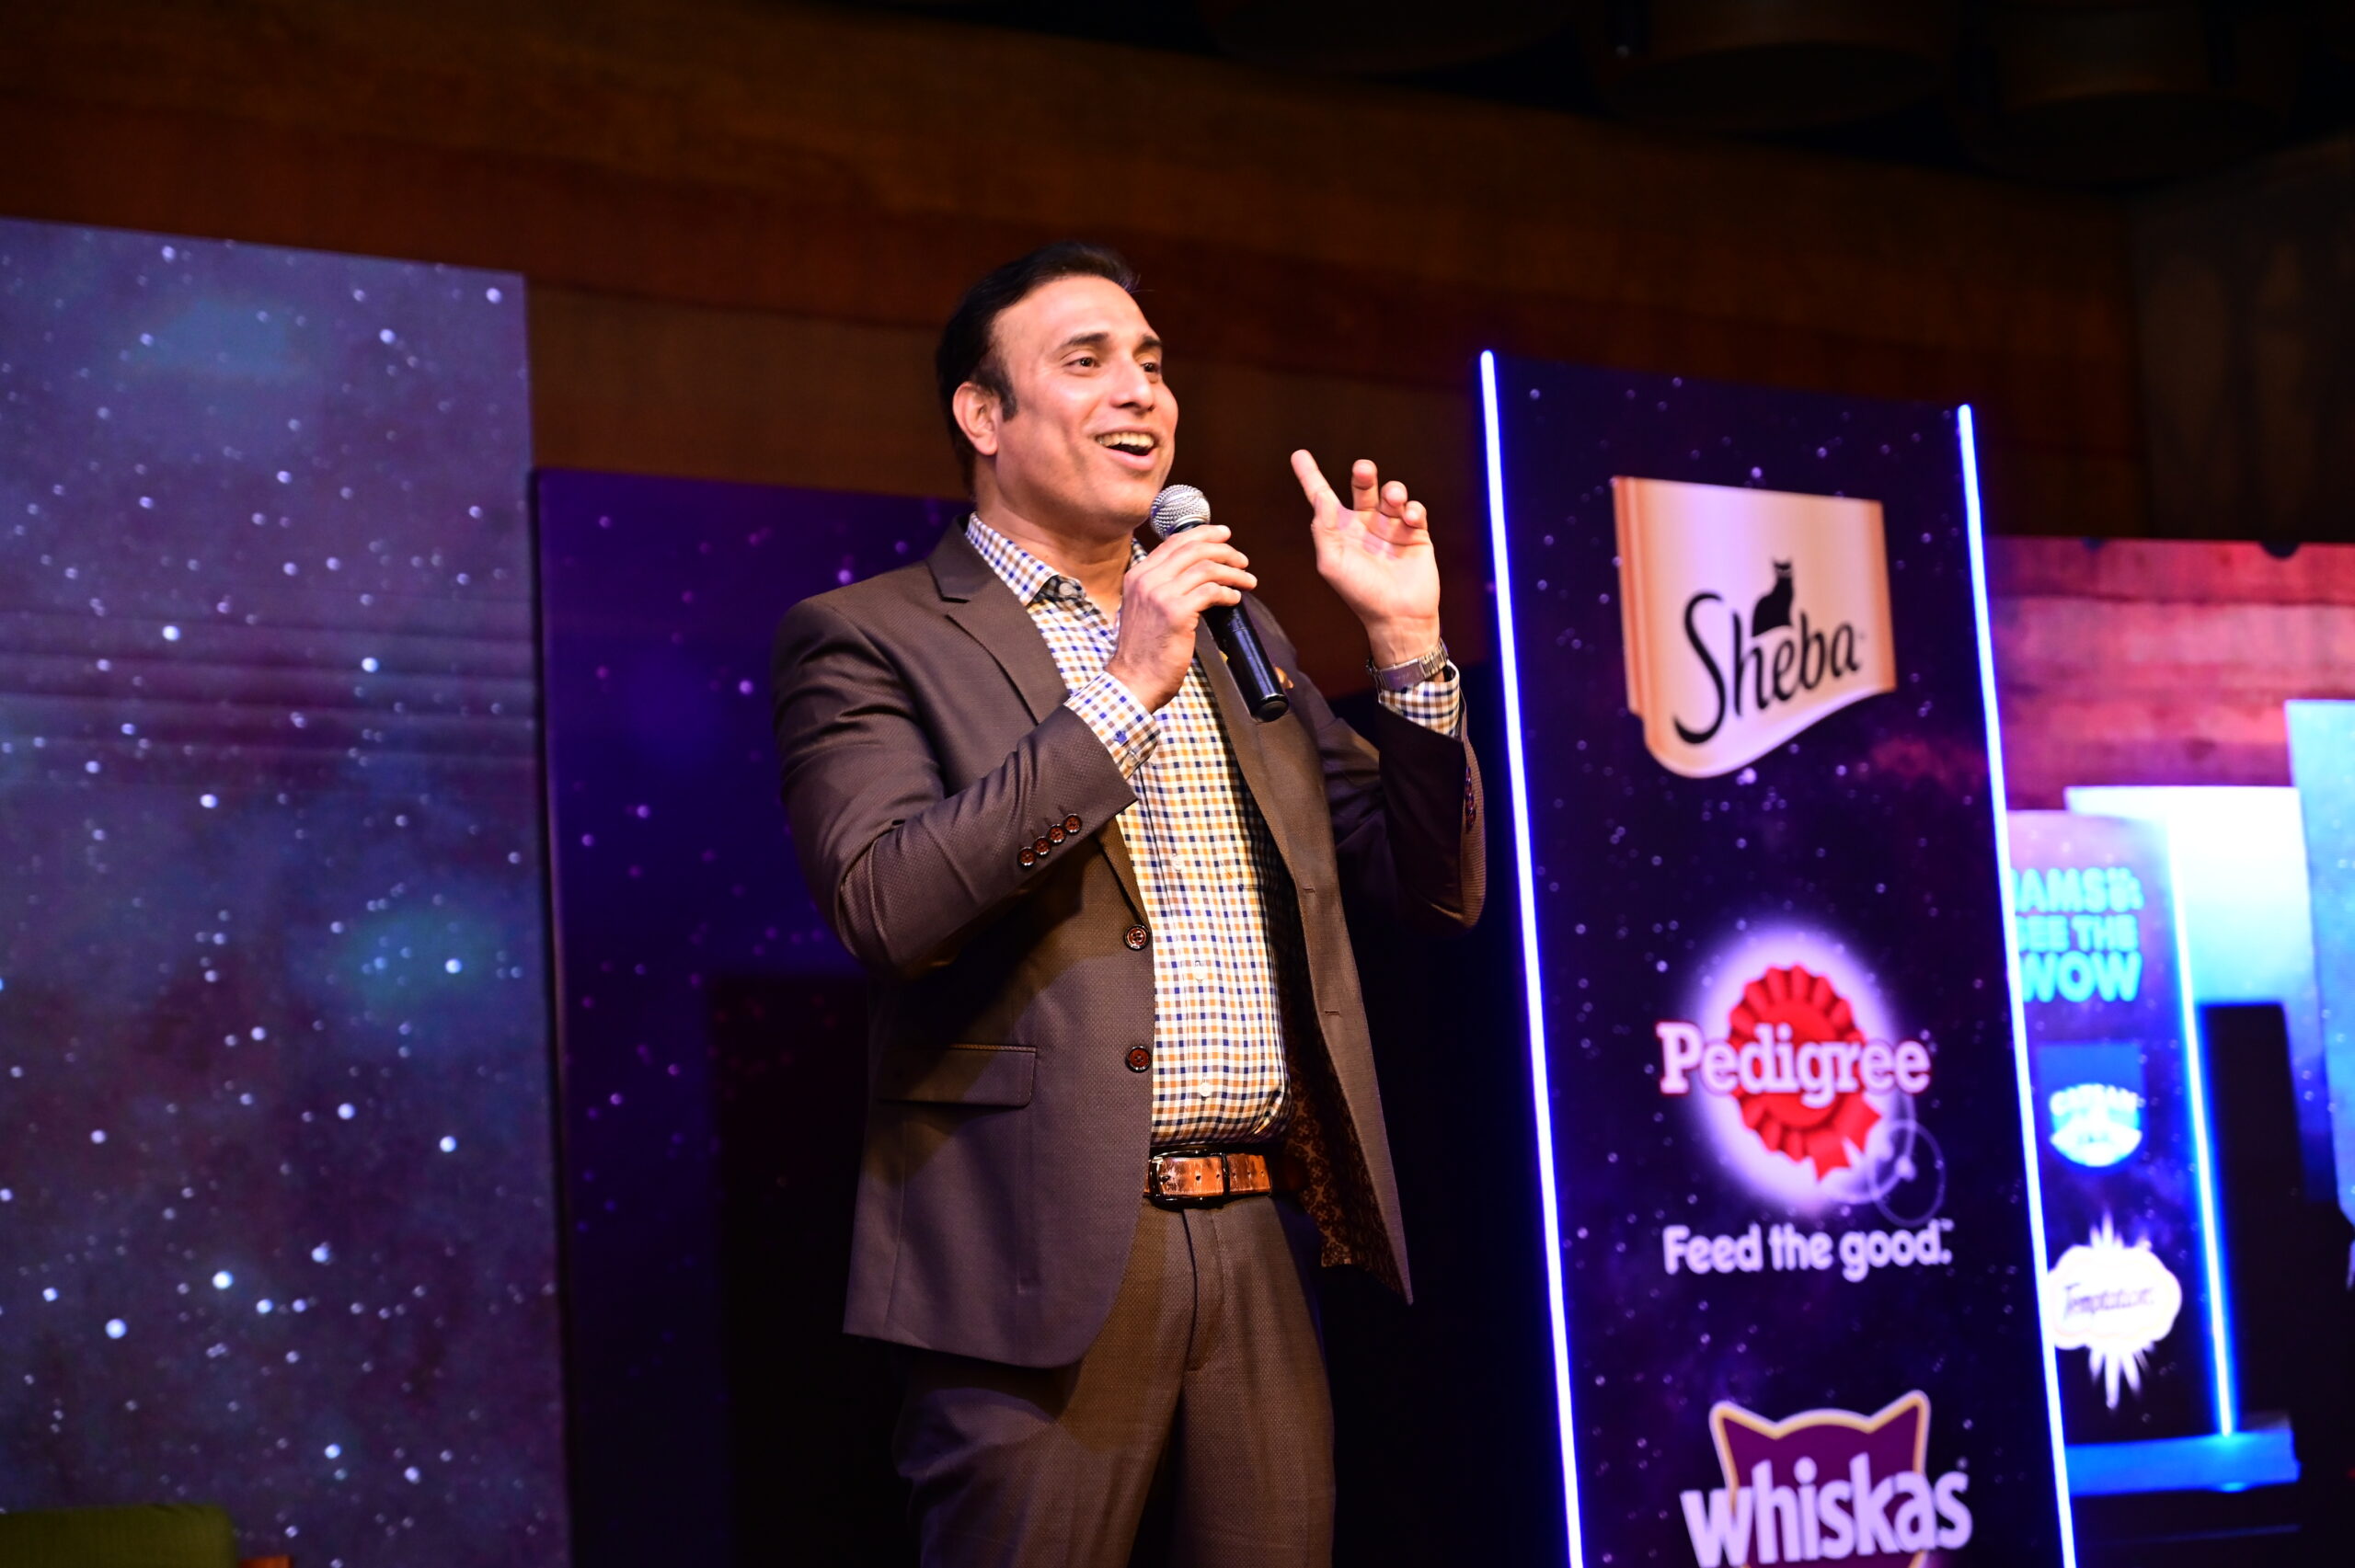 VVS Laxman as a guest speaker at a corporate event in Goa